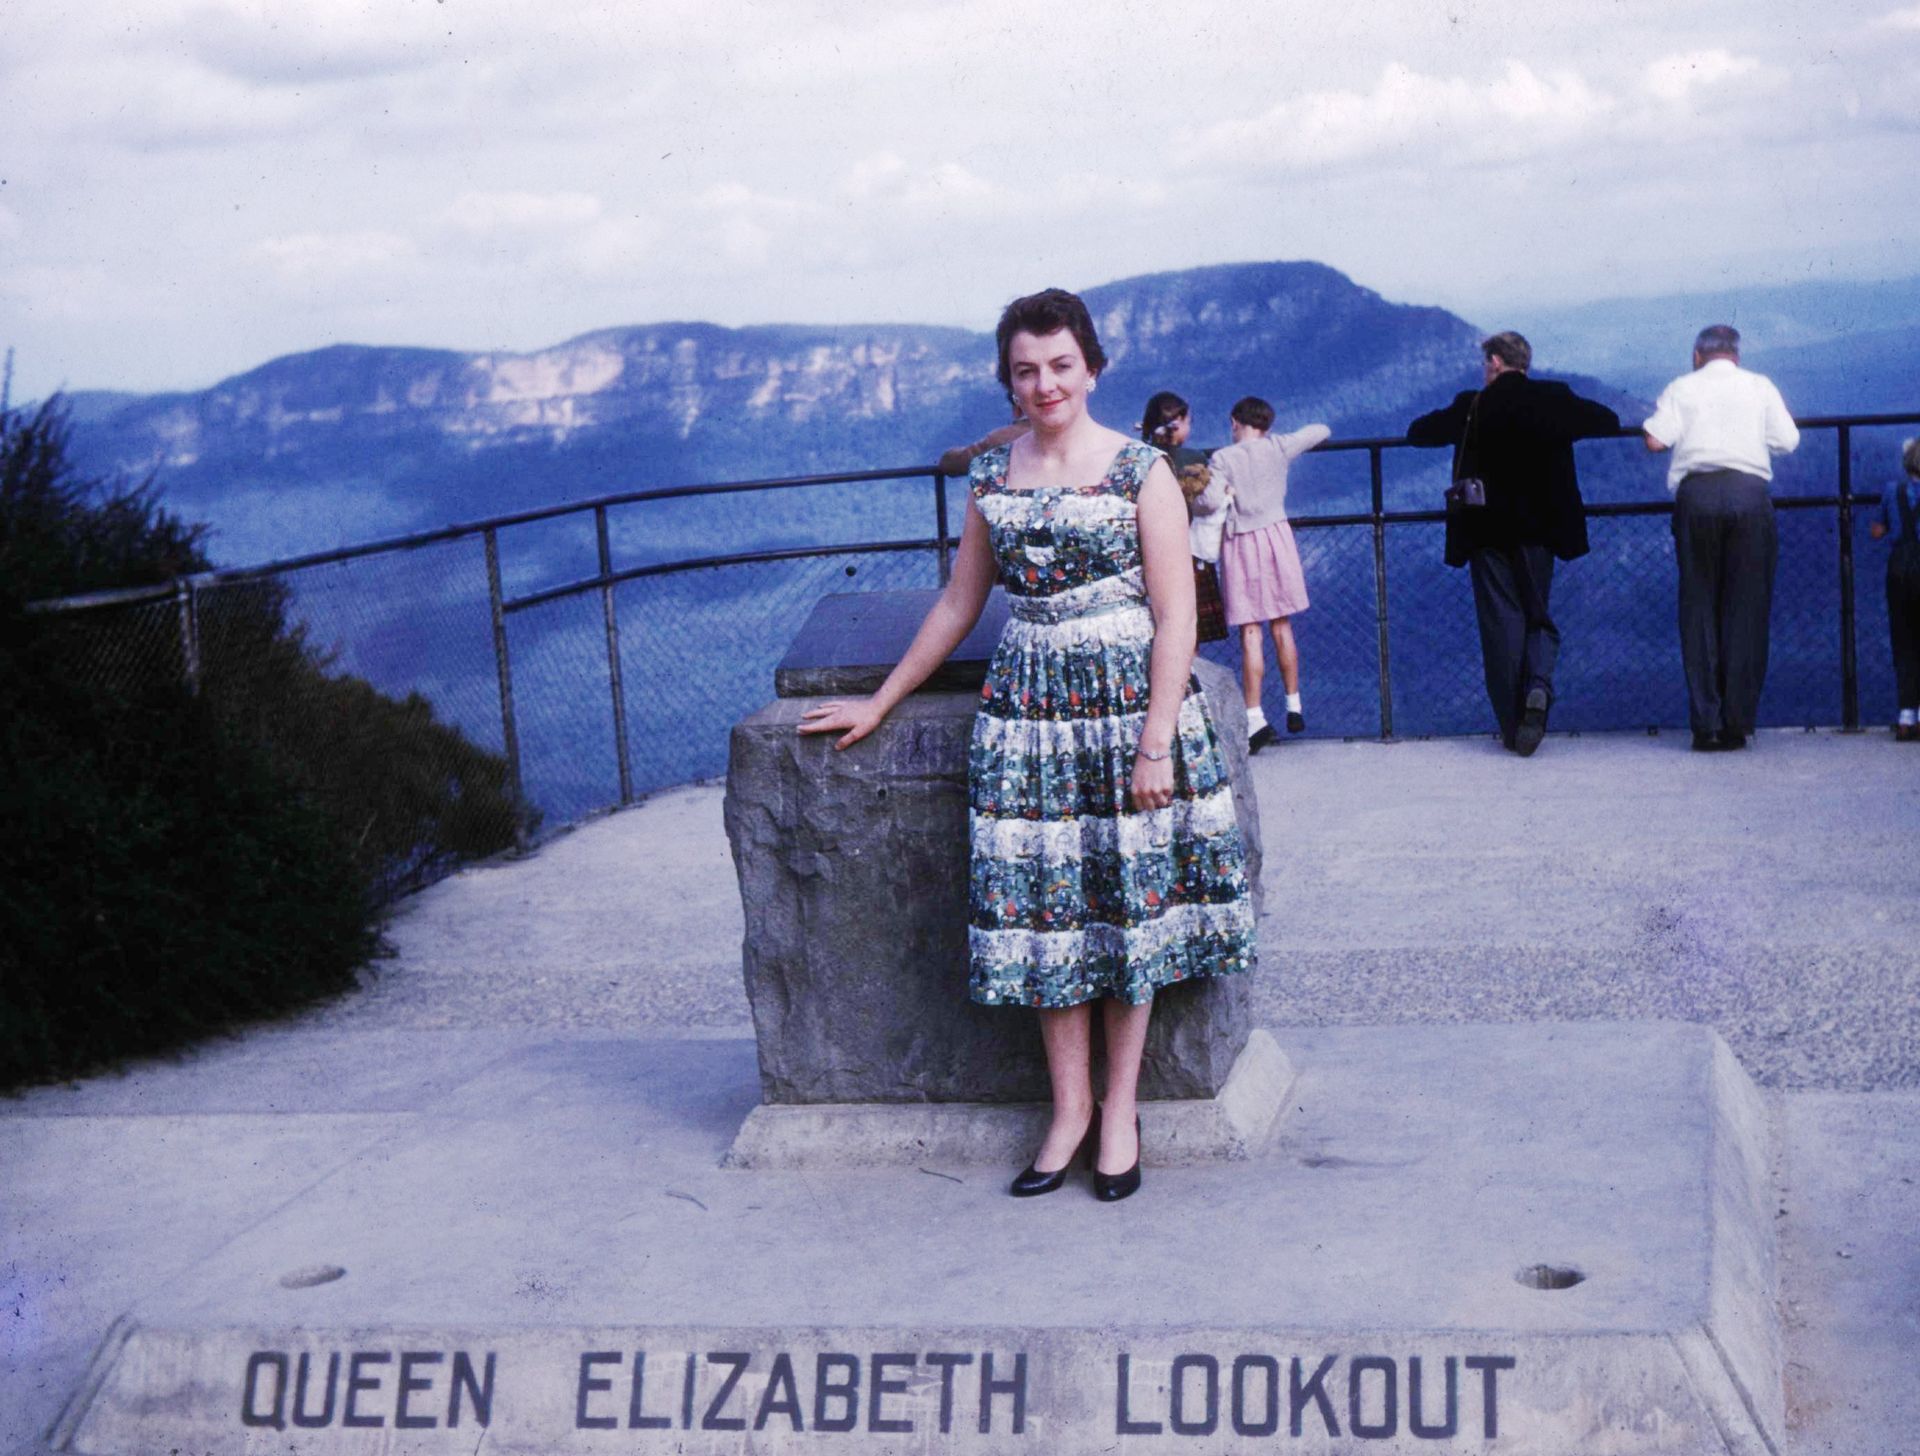 Mum in the The Blue Mountains after arriving in Sydney en route to Melbourne from Auckland, 1957.